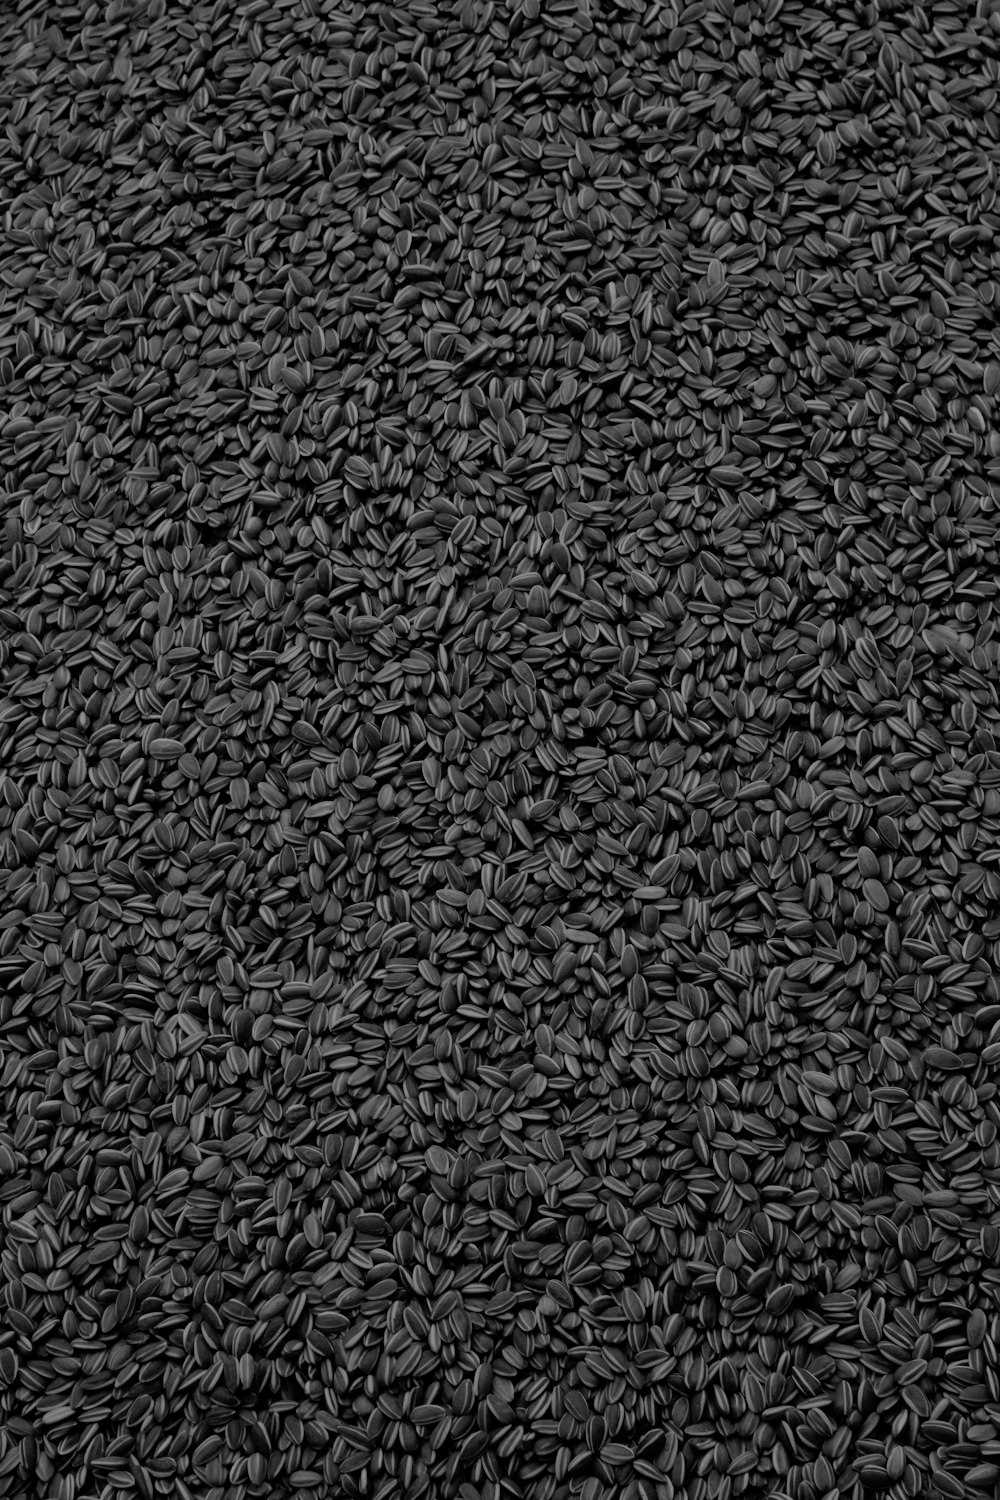 a pile of black seeds is shown in this image